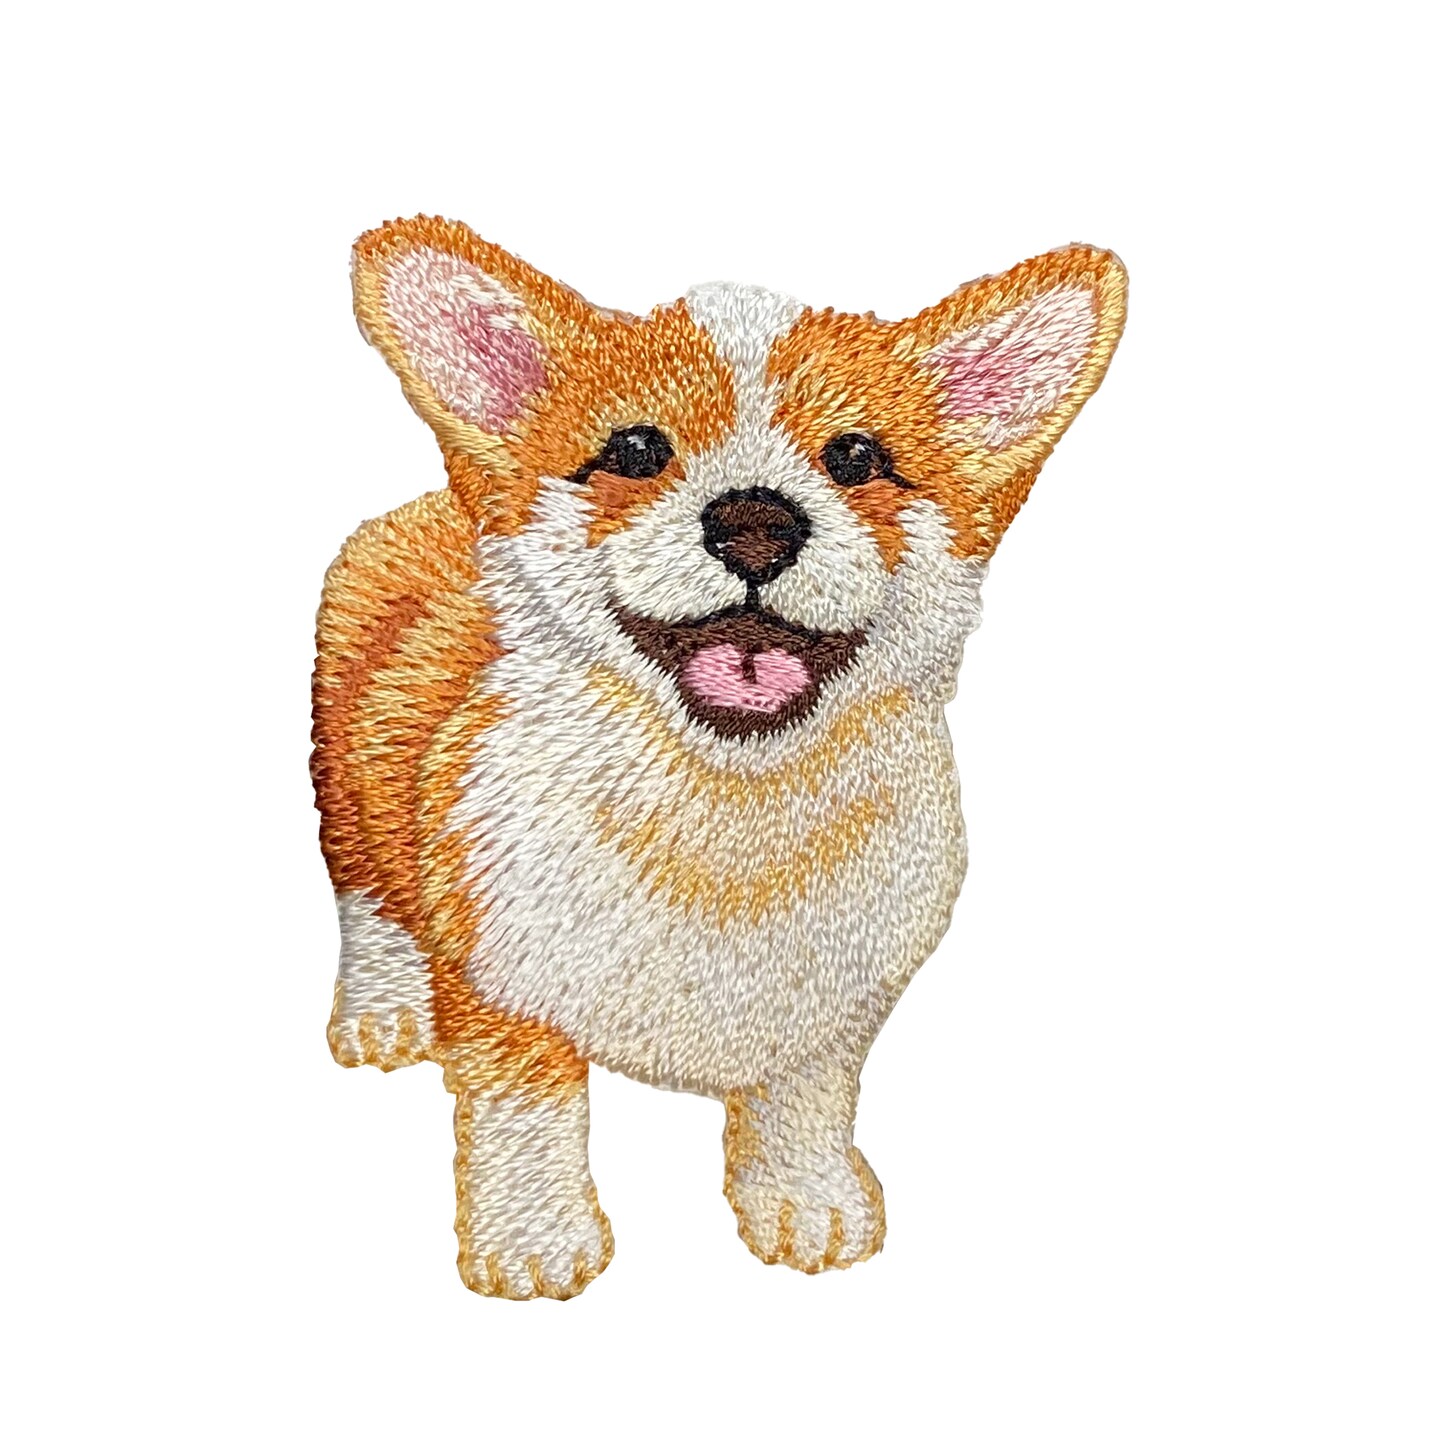 Welsh Pembroke Corgi, Puppy Dog, Realistic Pets, Embroidered, Iron on Patch